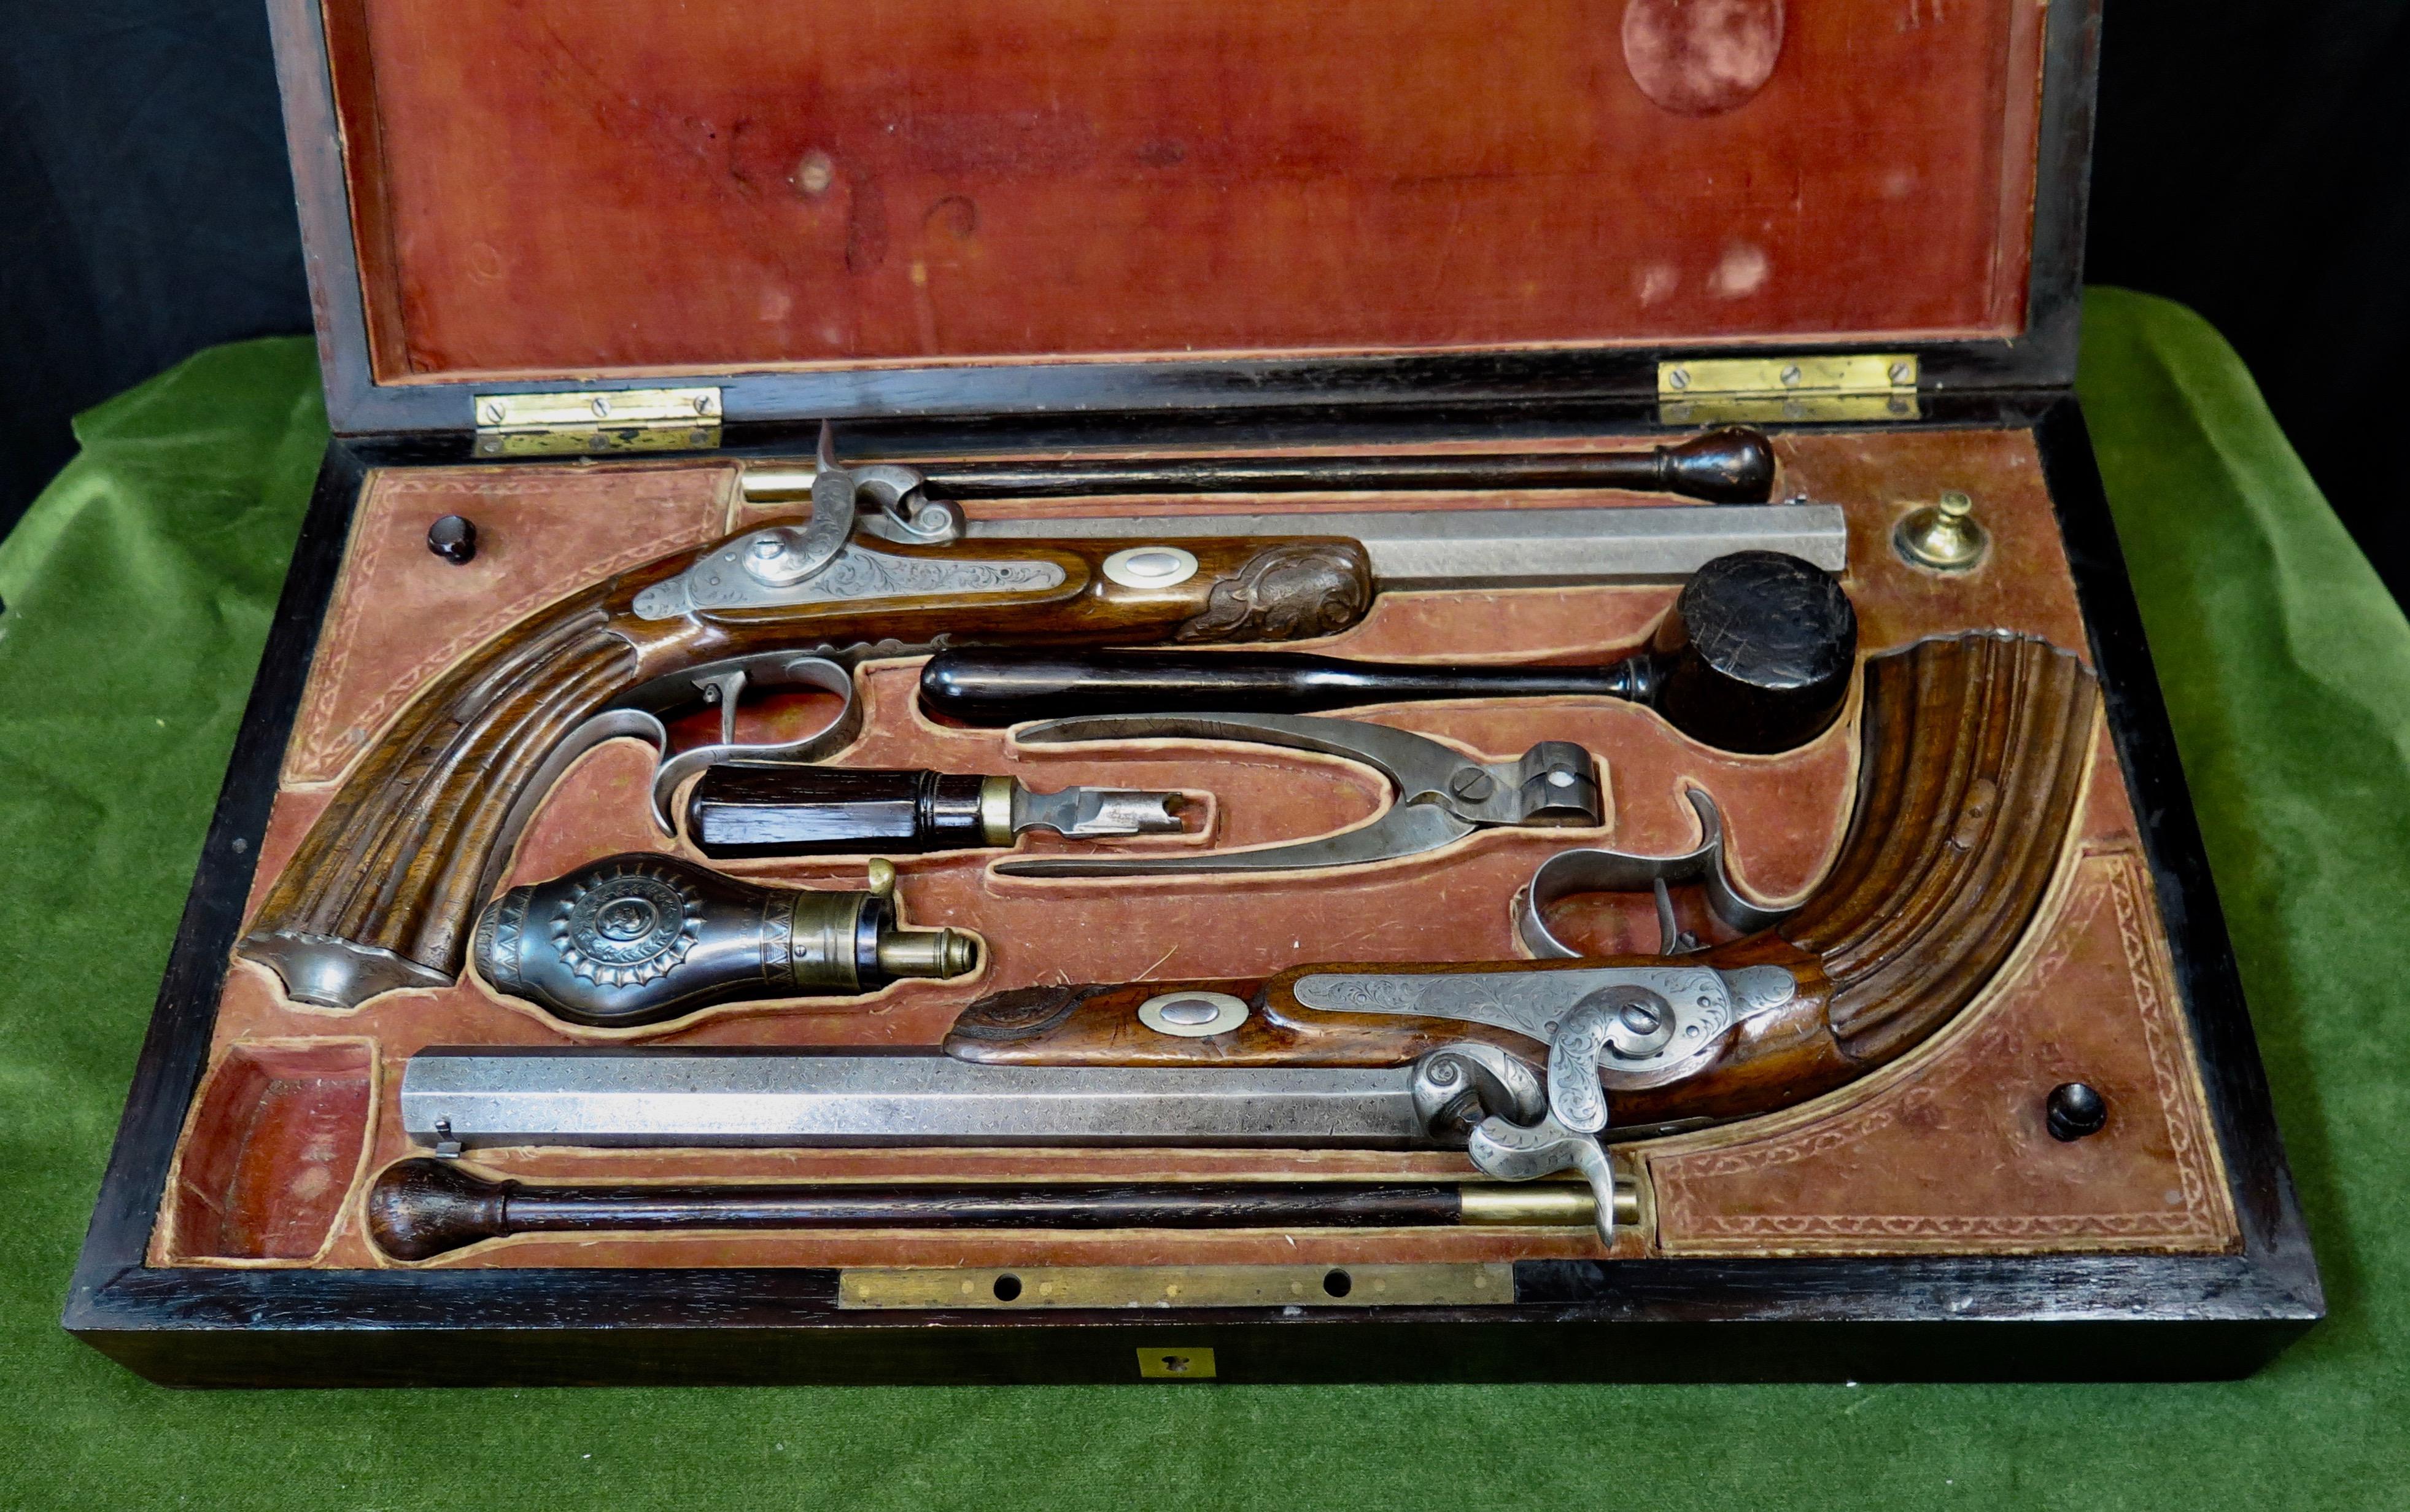 These vintage early to mid-19th century French percussion cap dueling pistols are presented in their original carrying case. Each is beautifully designed with a decorative etched elongated steel octagon shape barrel. The shaft of the barrel is